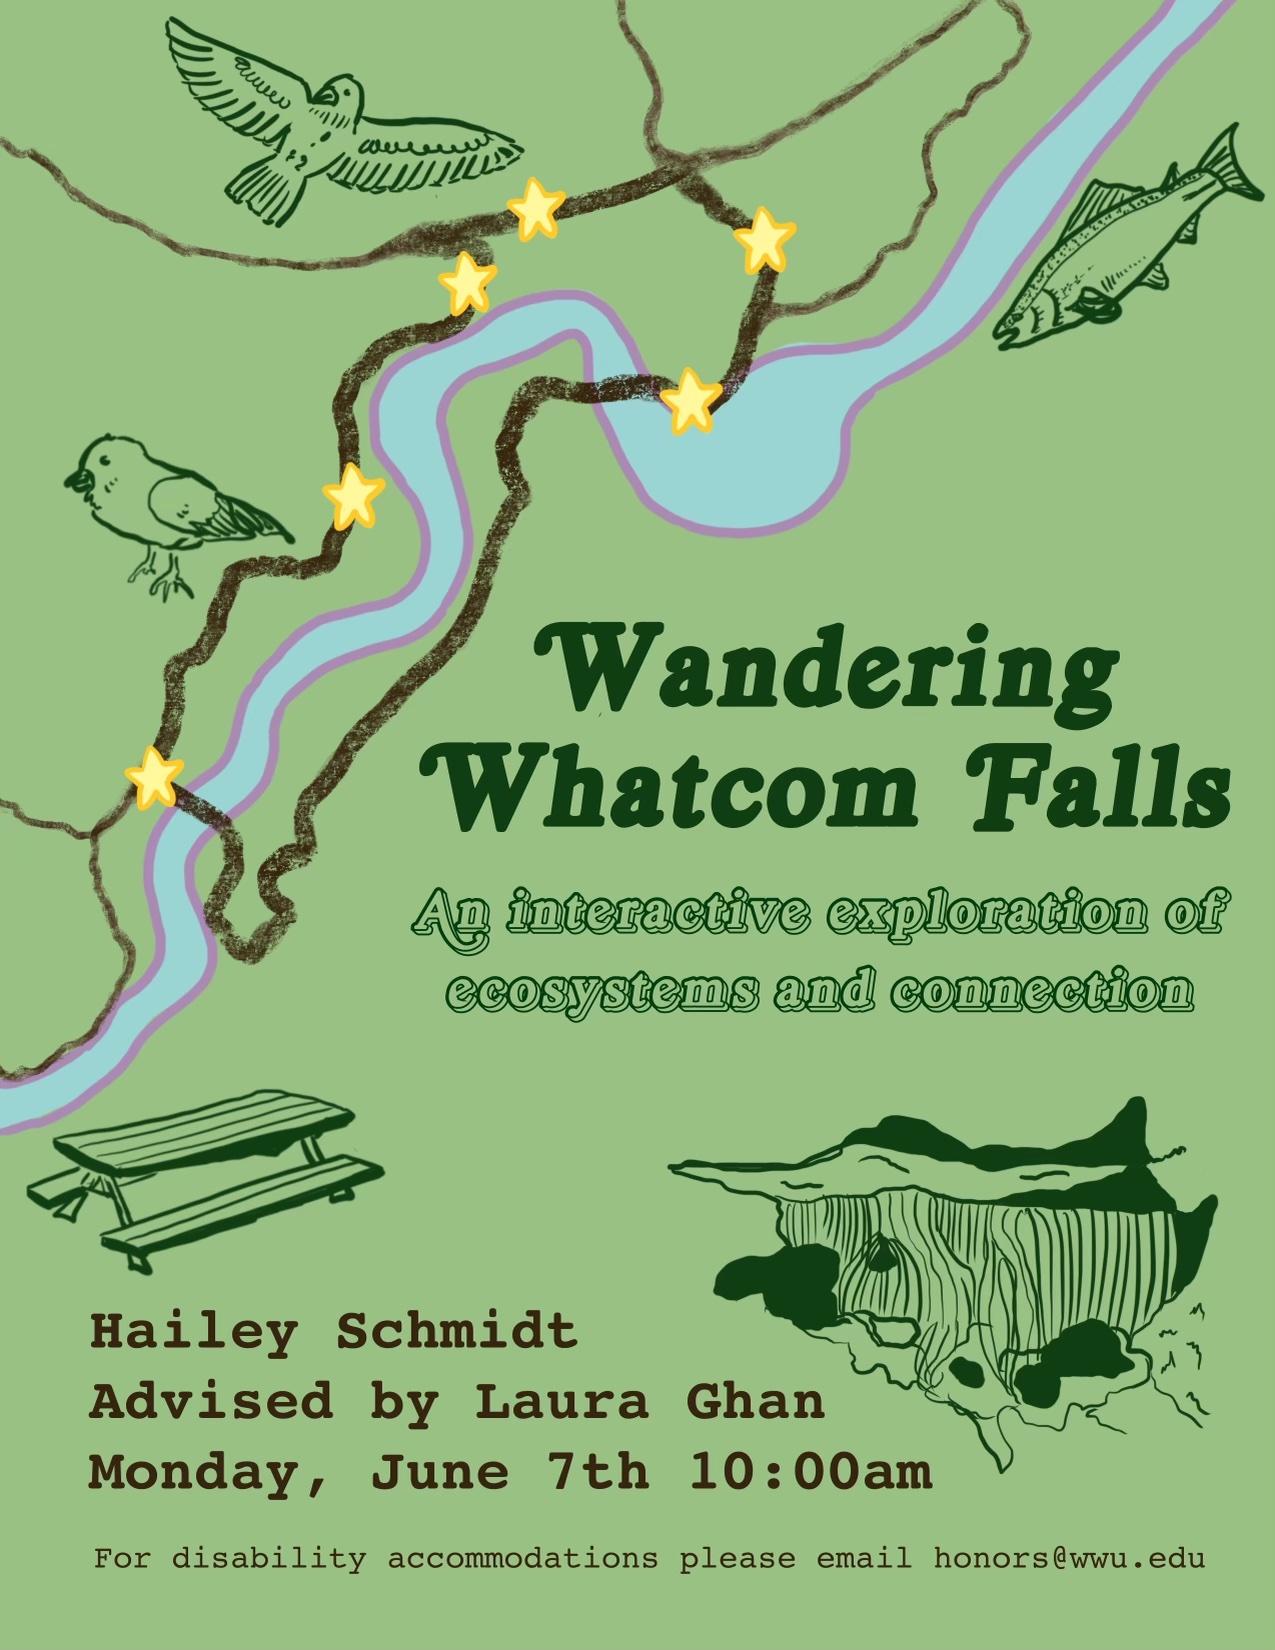 A hand-sketched map of trails around a creek with stars placed along as markers. The map is surrounded by sketches of birds, a fish, a picnic table, and a waterfall. Text reads: "Wandering Whatcom Falls: An interactive exploration of ecosystems and connection. Hailey Schmidt, advised by Laura Ghan. Monday, June 7th 10:00 am. For disability accommodations please email honors@wwu.edu". 